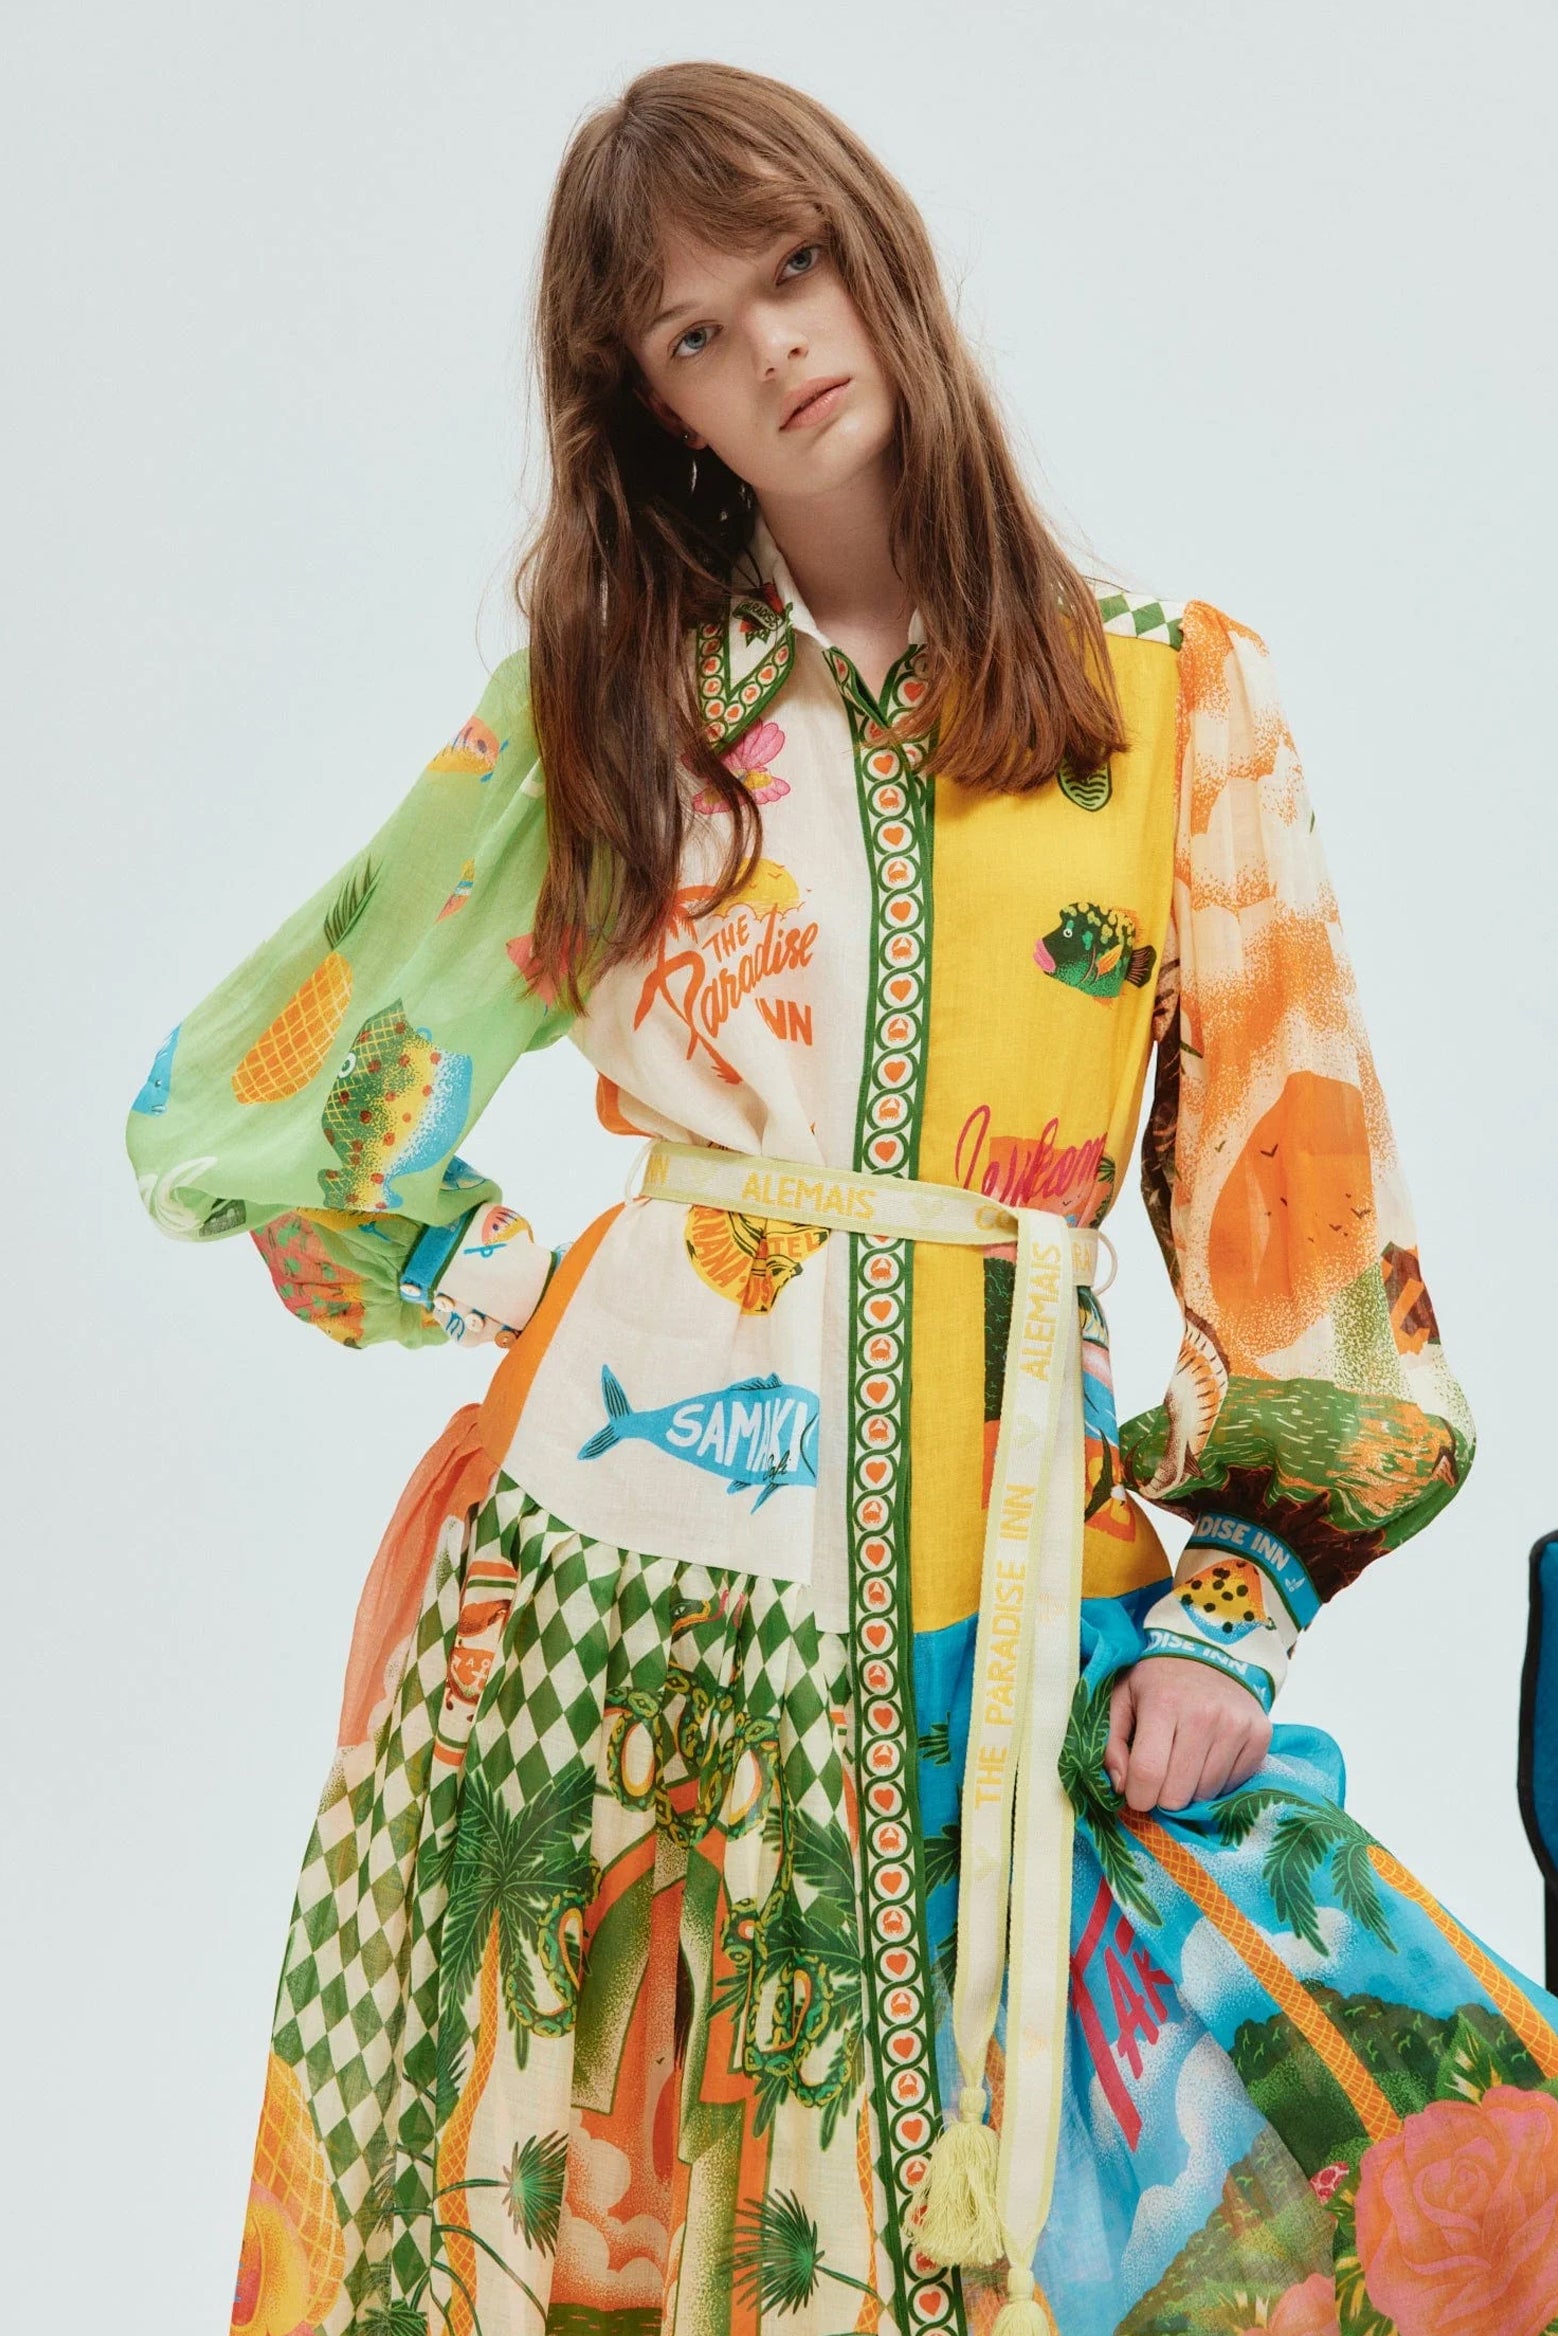 Alemais Paradiso Shirtdress in Multi available at The New Trend Australia.